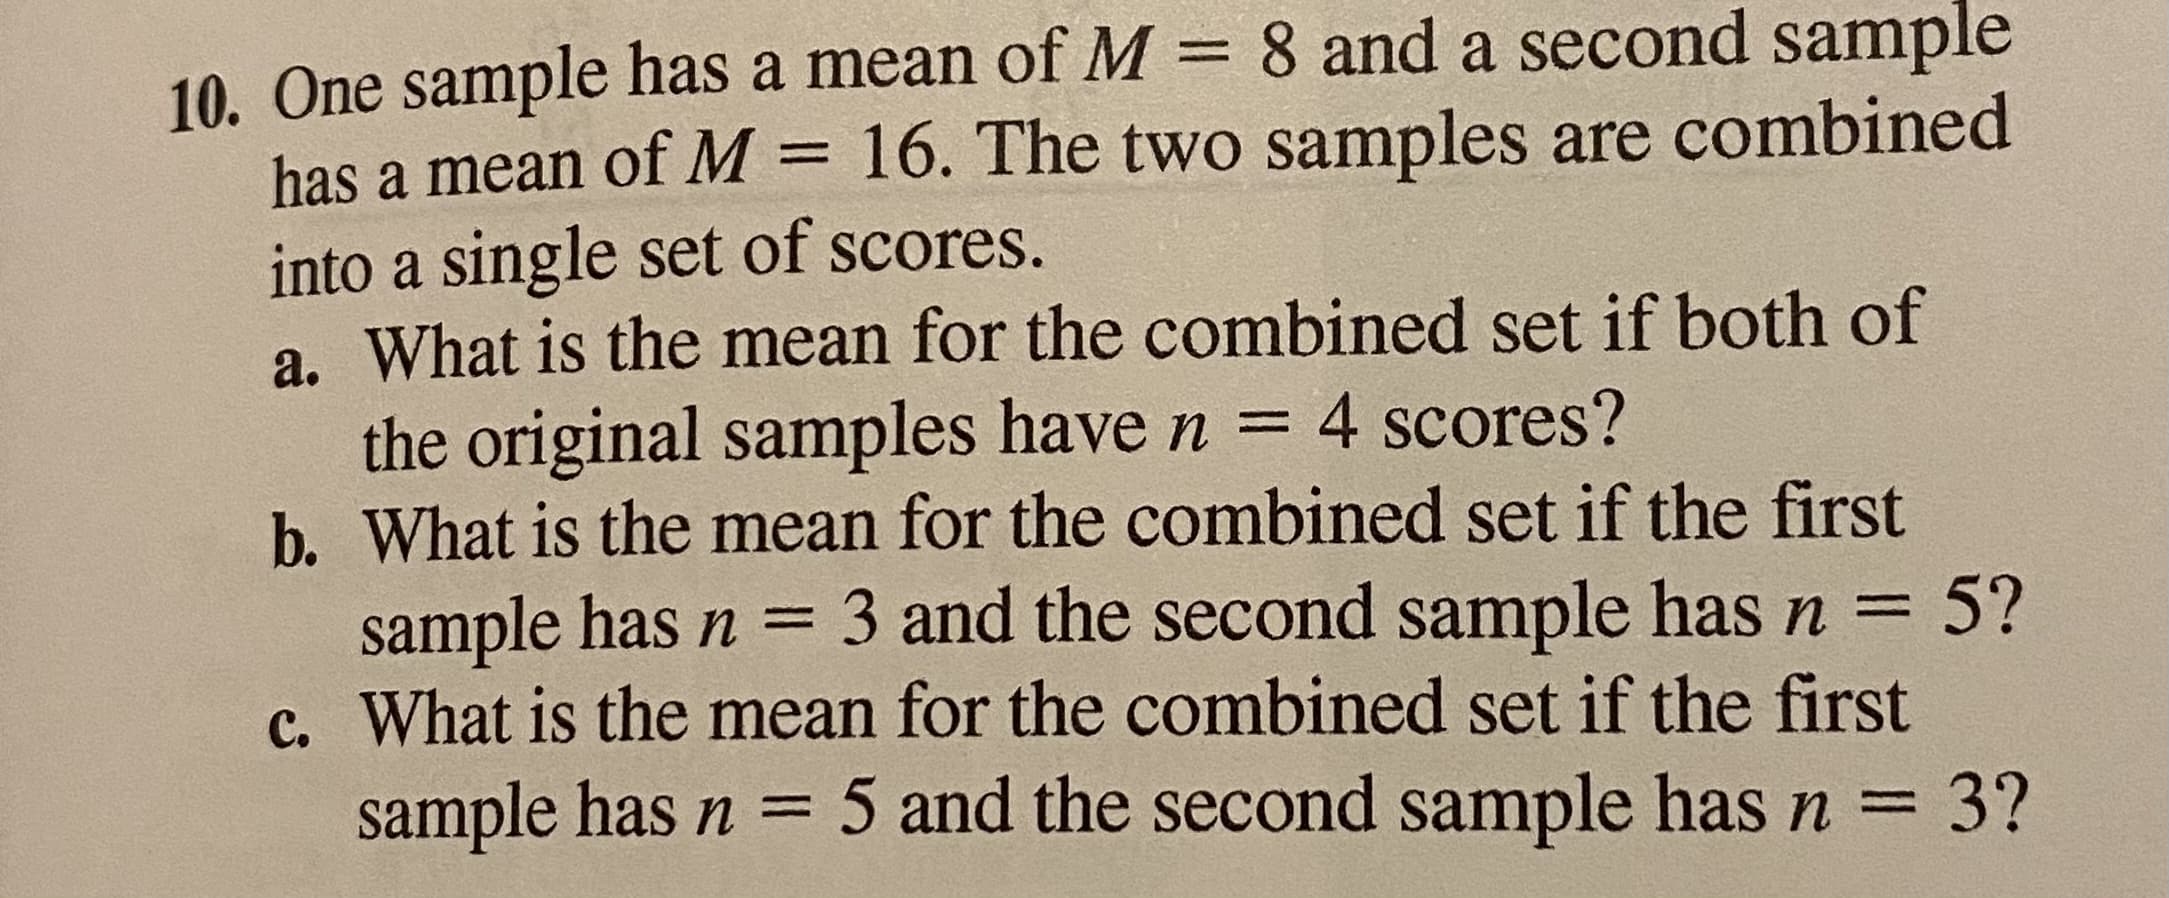 a. What is the mearn
the original samples have n = 4 scores?
b. What is the mean for the combined set if the first
sample has n = 3 and the second sample has n = 5?
c. What is the mean for the combined set if the first
sample has n = 5 and the second sample has n = 3?
%3D
